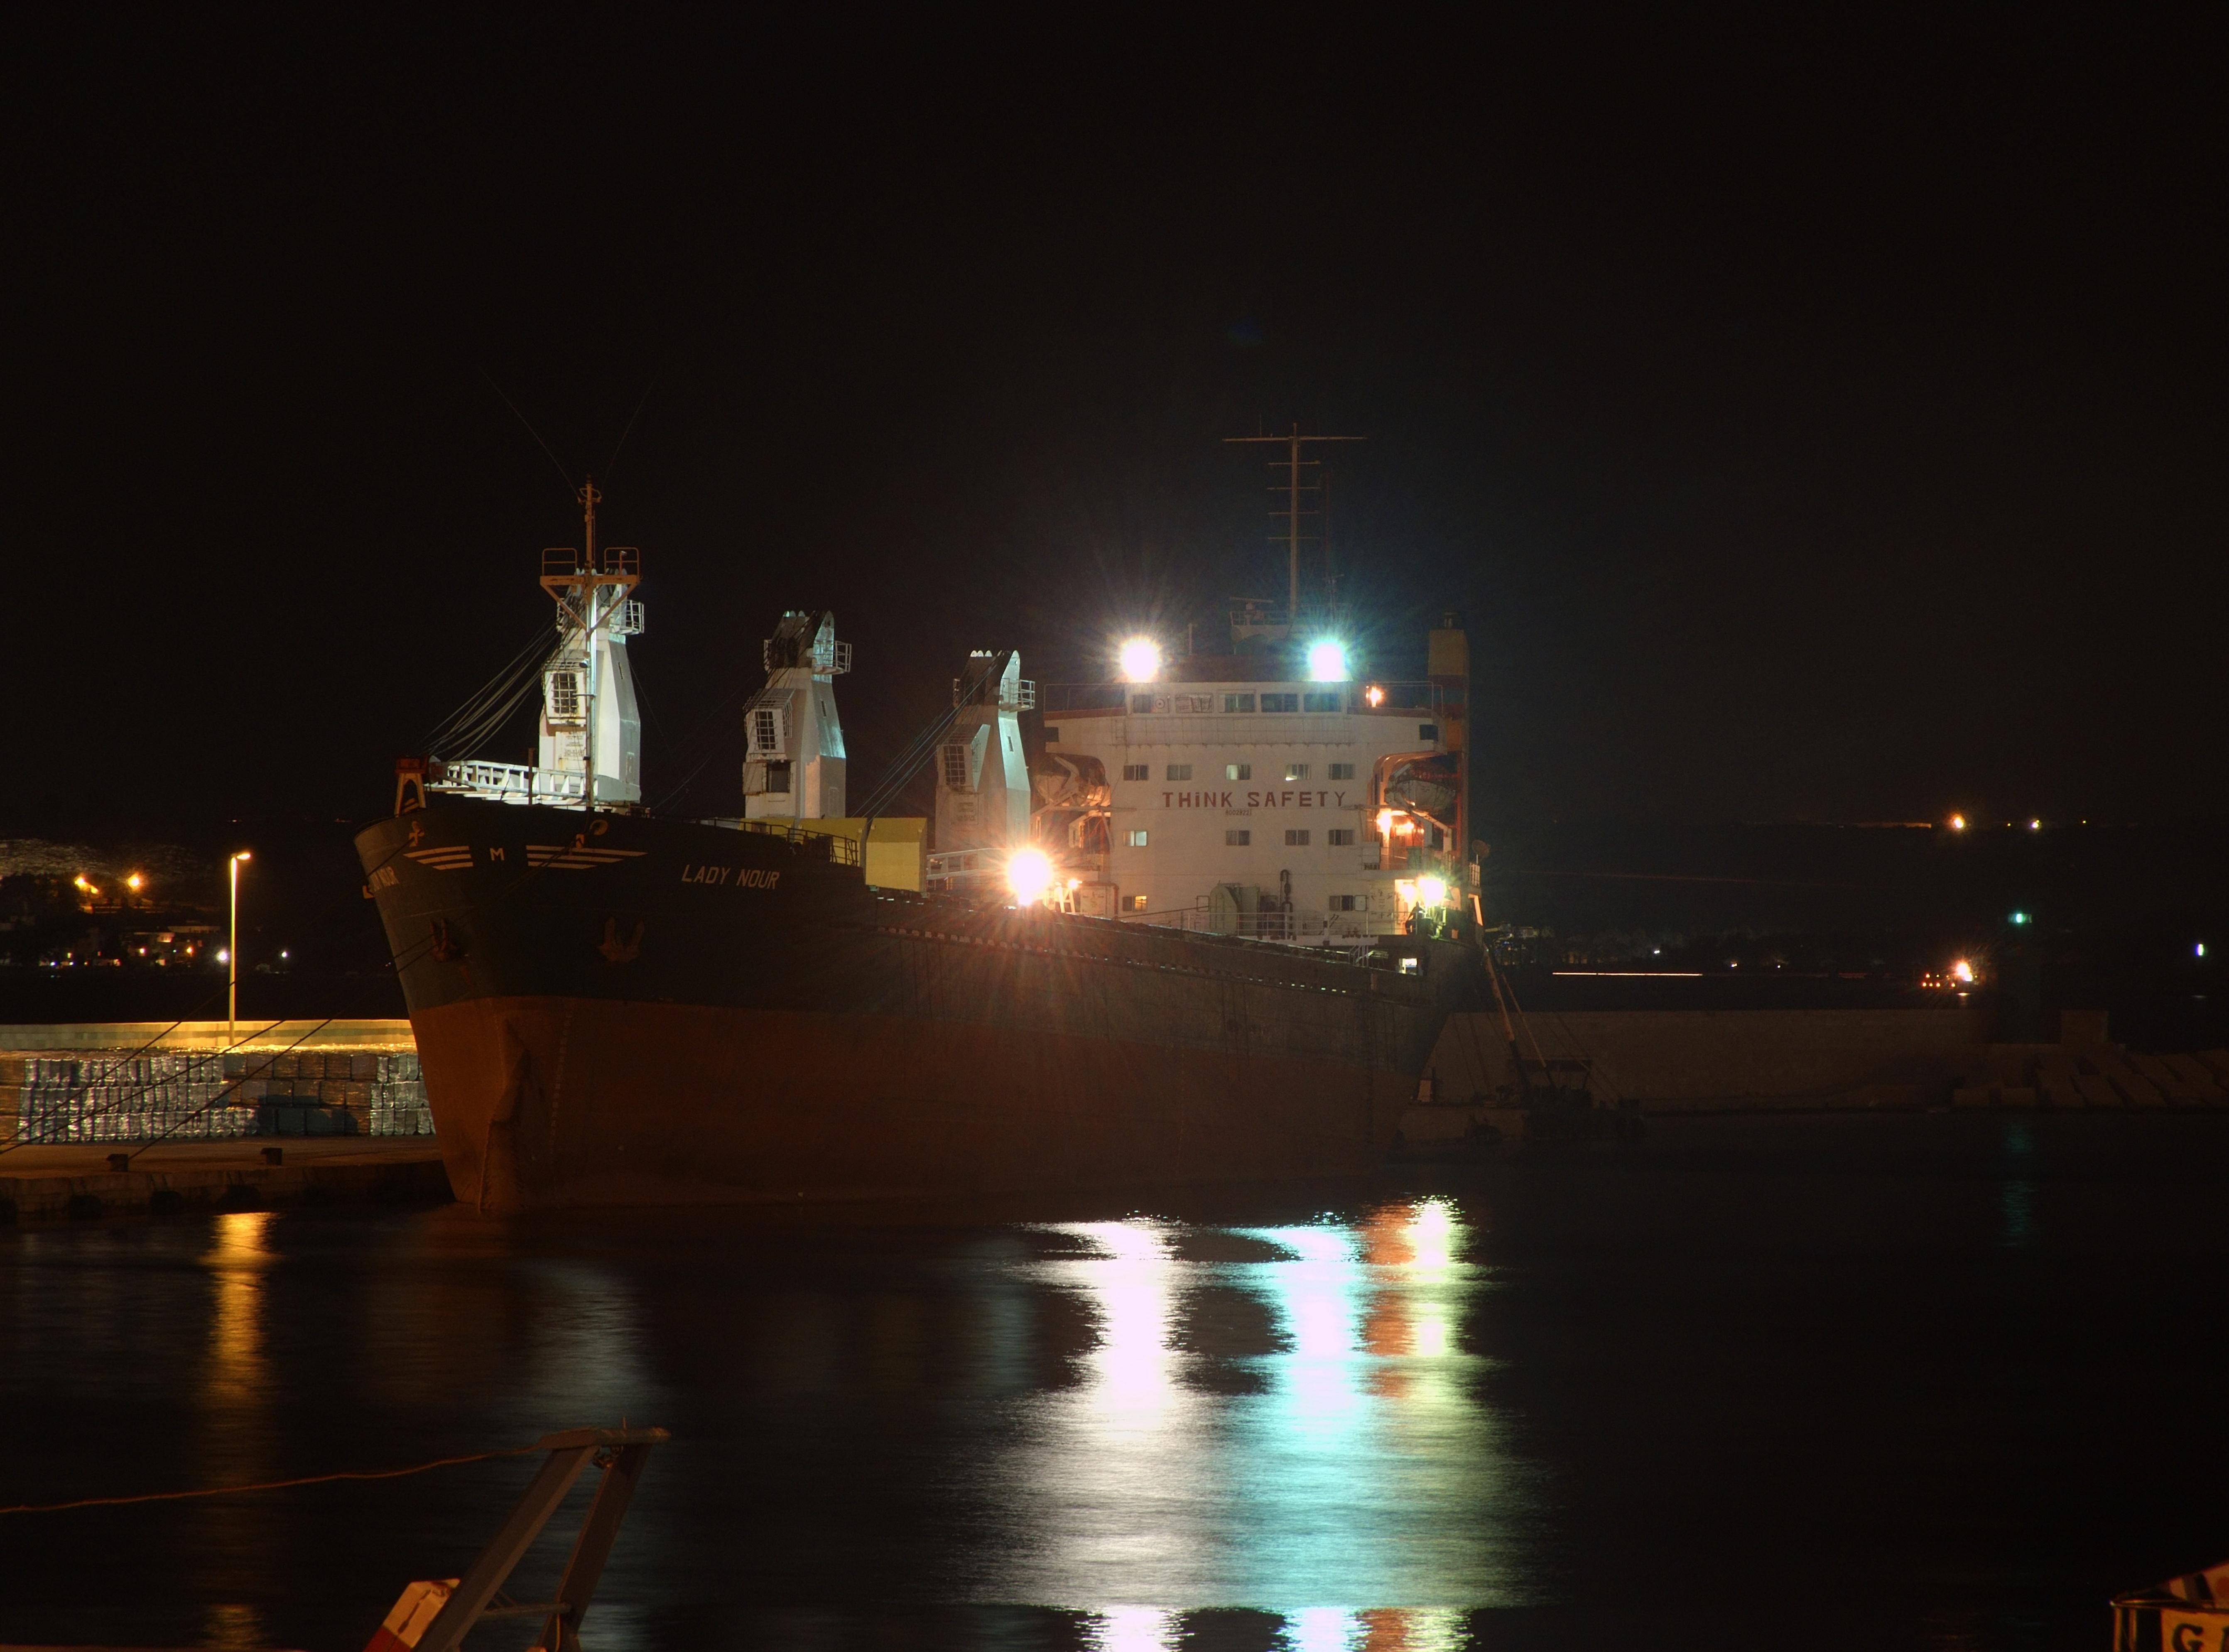 Gallipoli (Lecce, Italy): Ship in the harbour of Gallipoli by night - Gallipoli (Lecce, Italy)